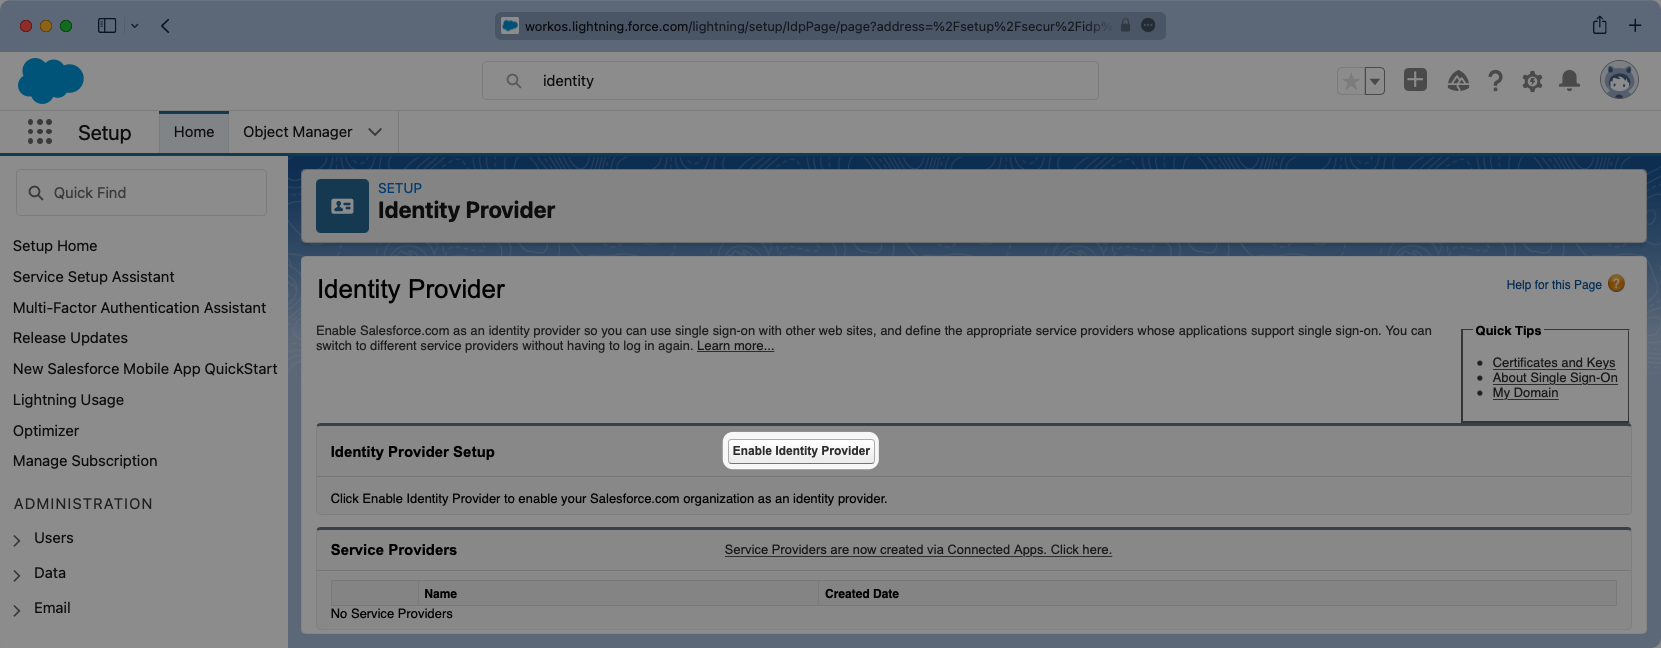 A screenshot showing how to enable Salesforce as an Identity Provider in the Salesforce dashboard.